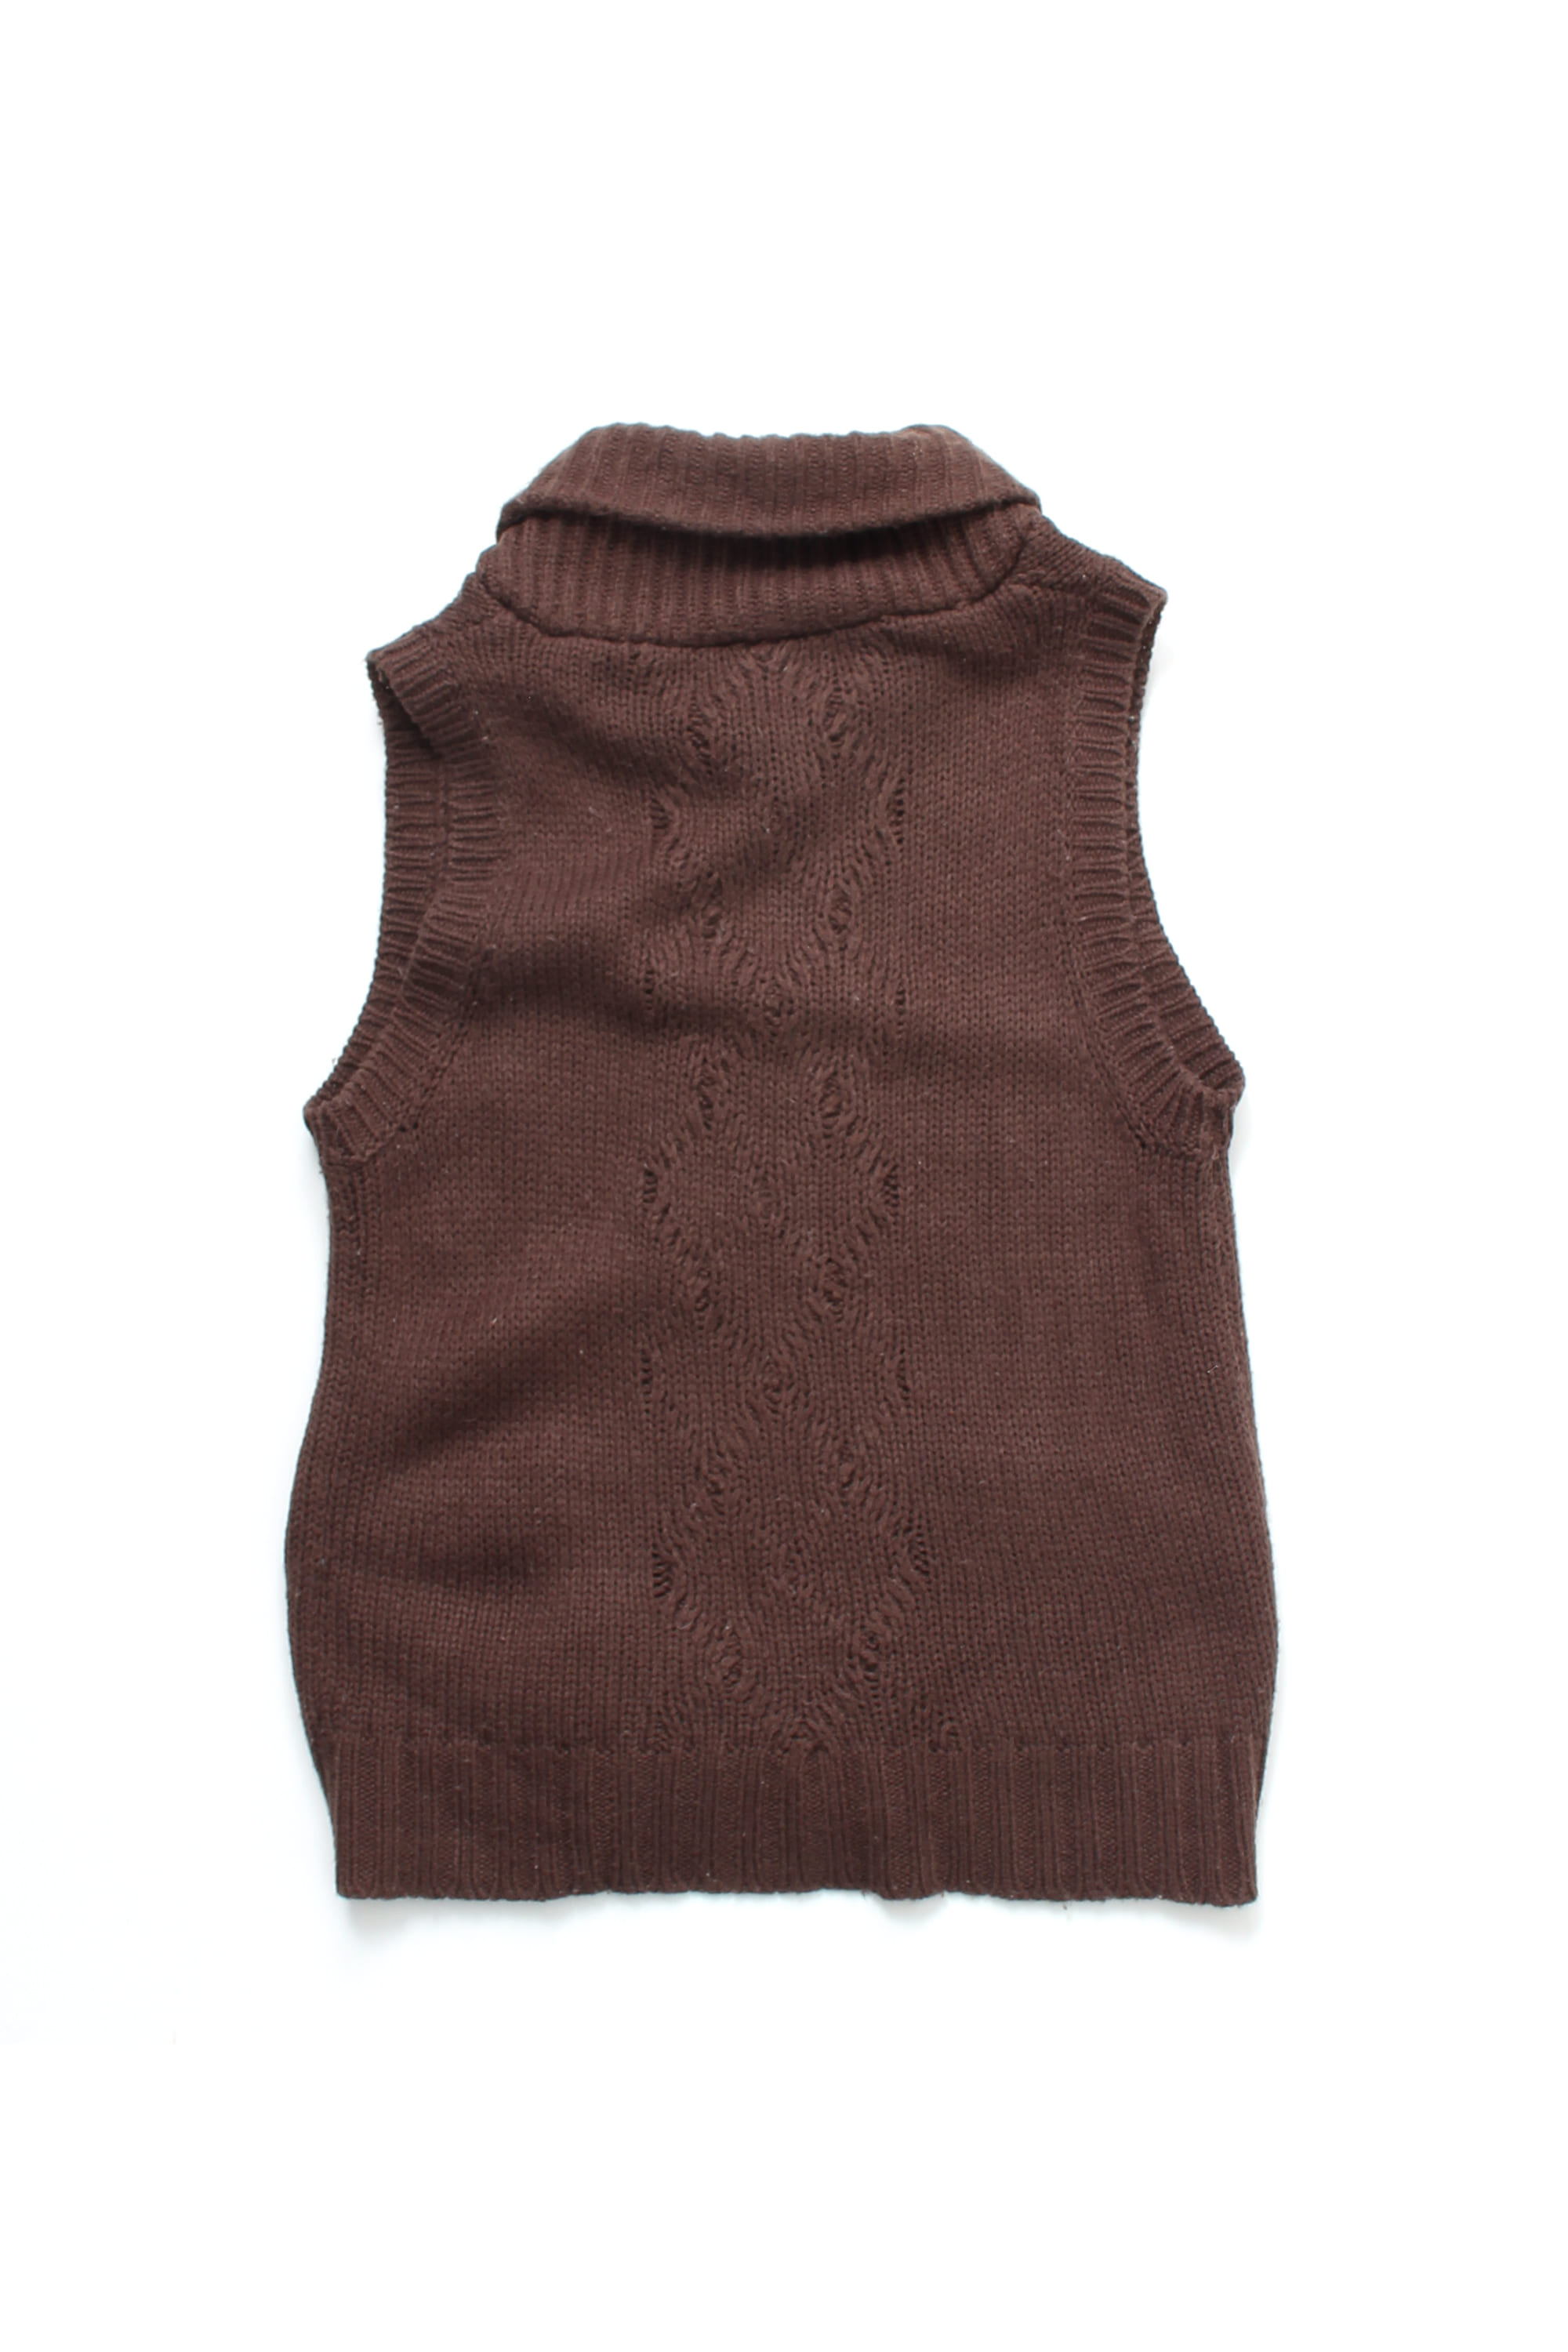 niko and... Knit Vest